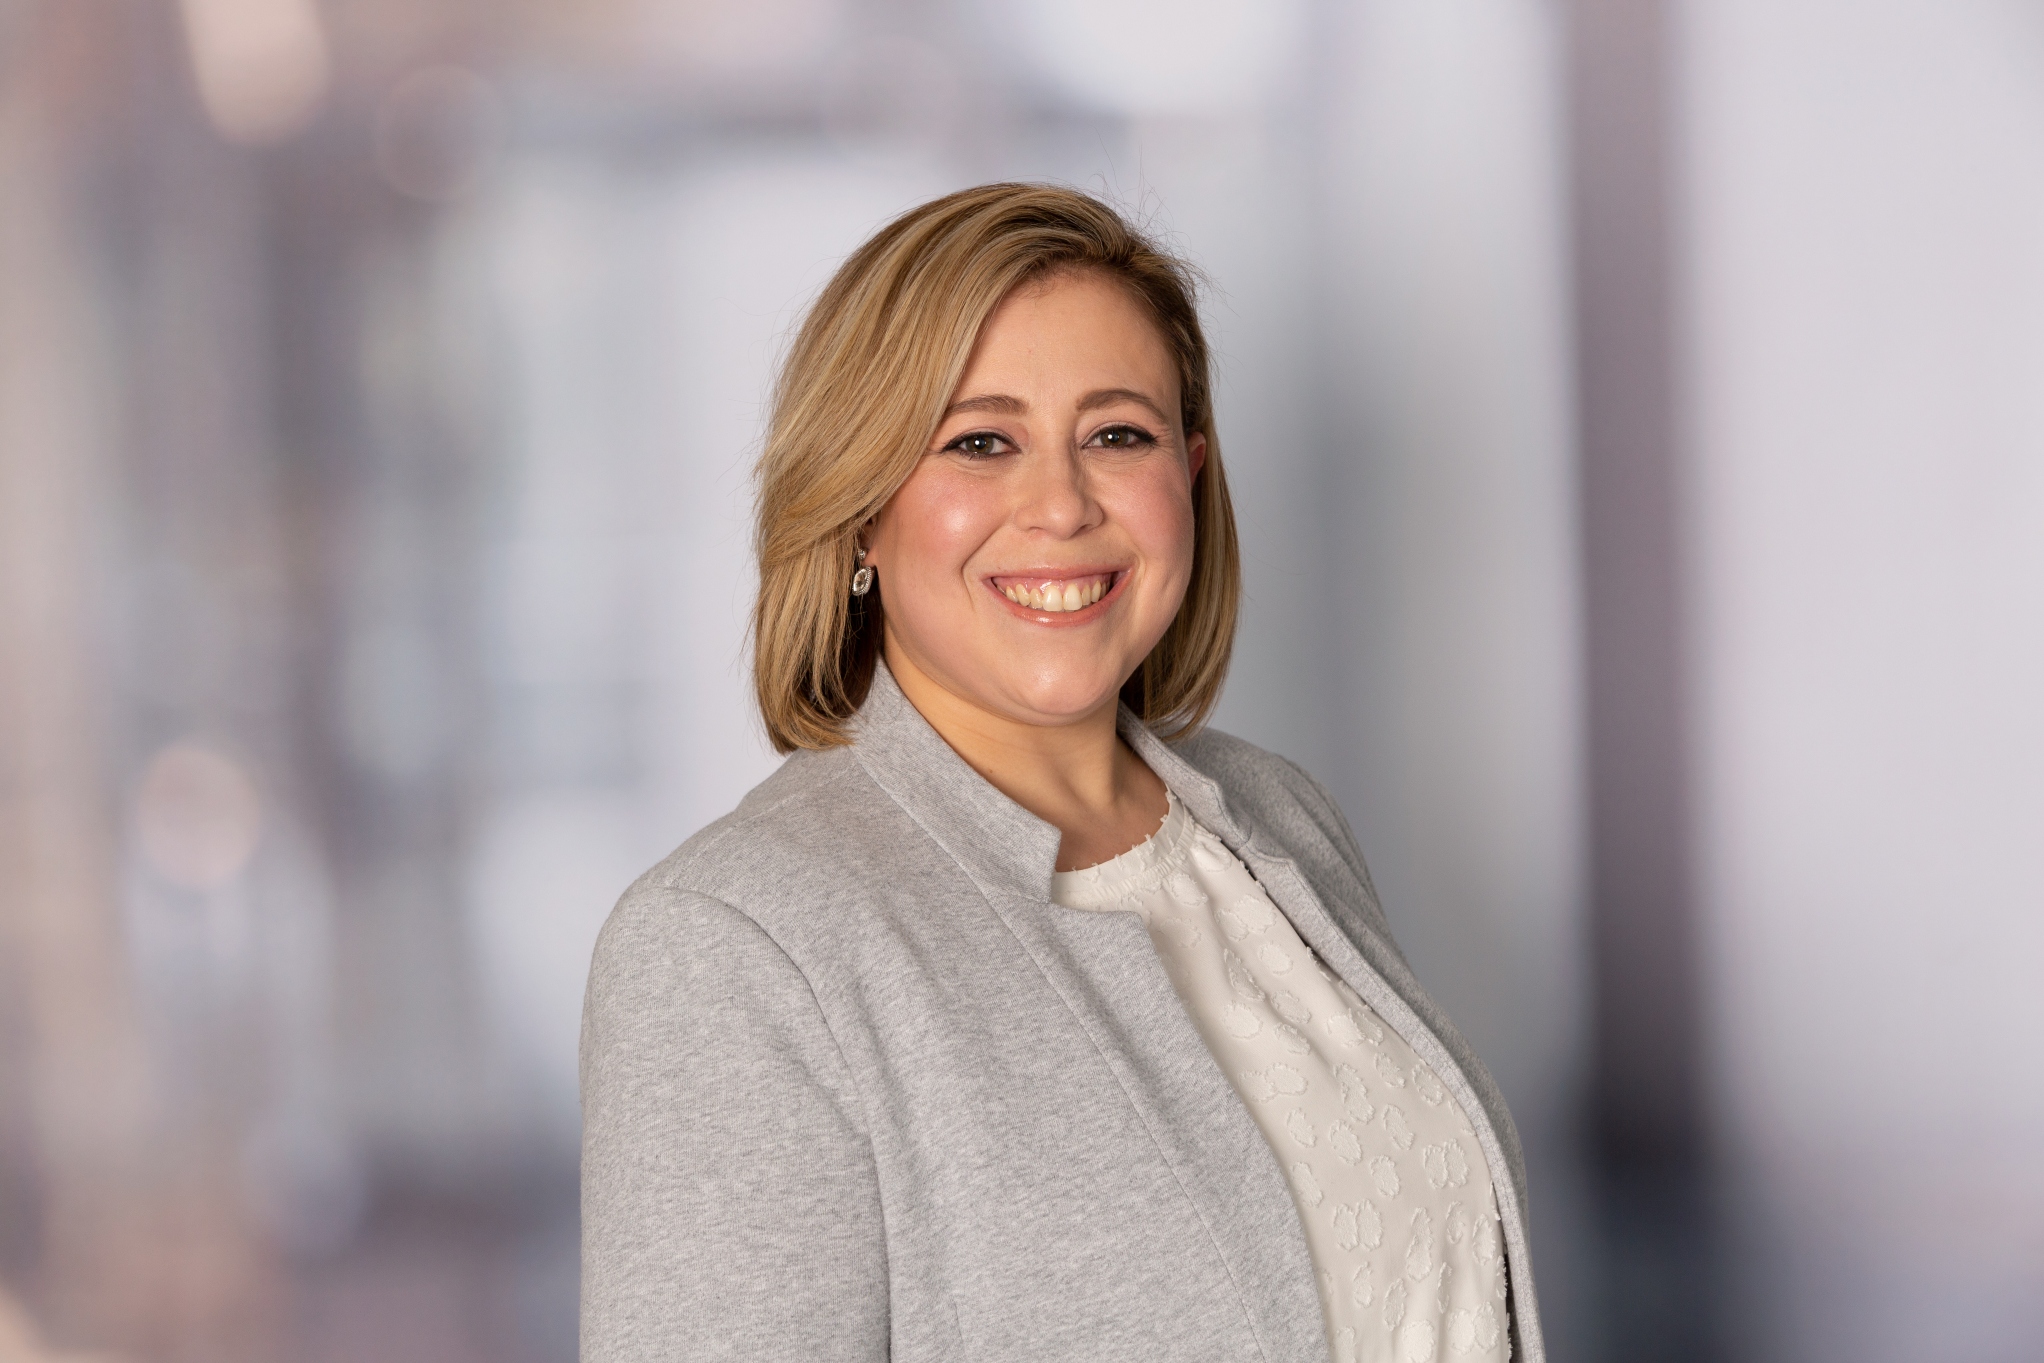 Rebecca Humphrey, executive vice president of MACRO, A Savills Company, has been appointed Workplace Practice Group leader for Savills North America.